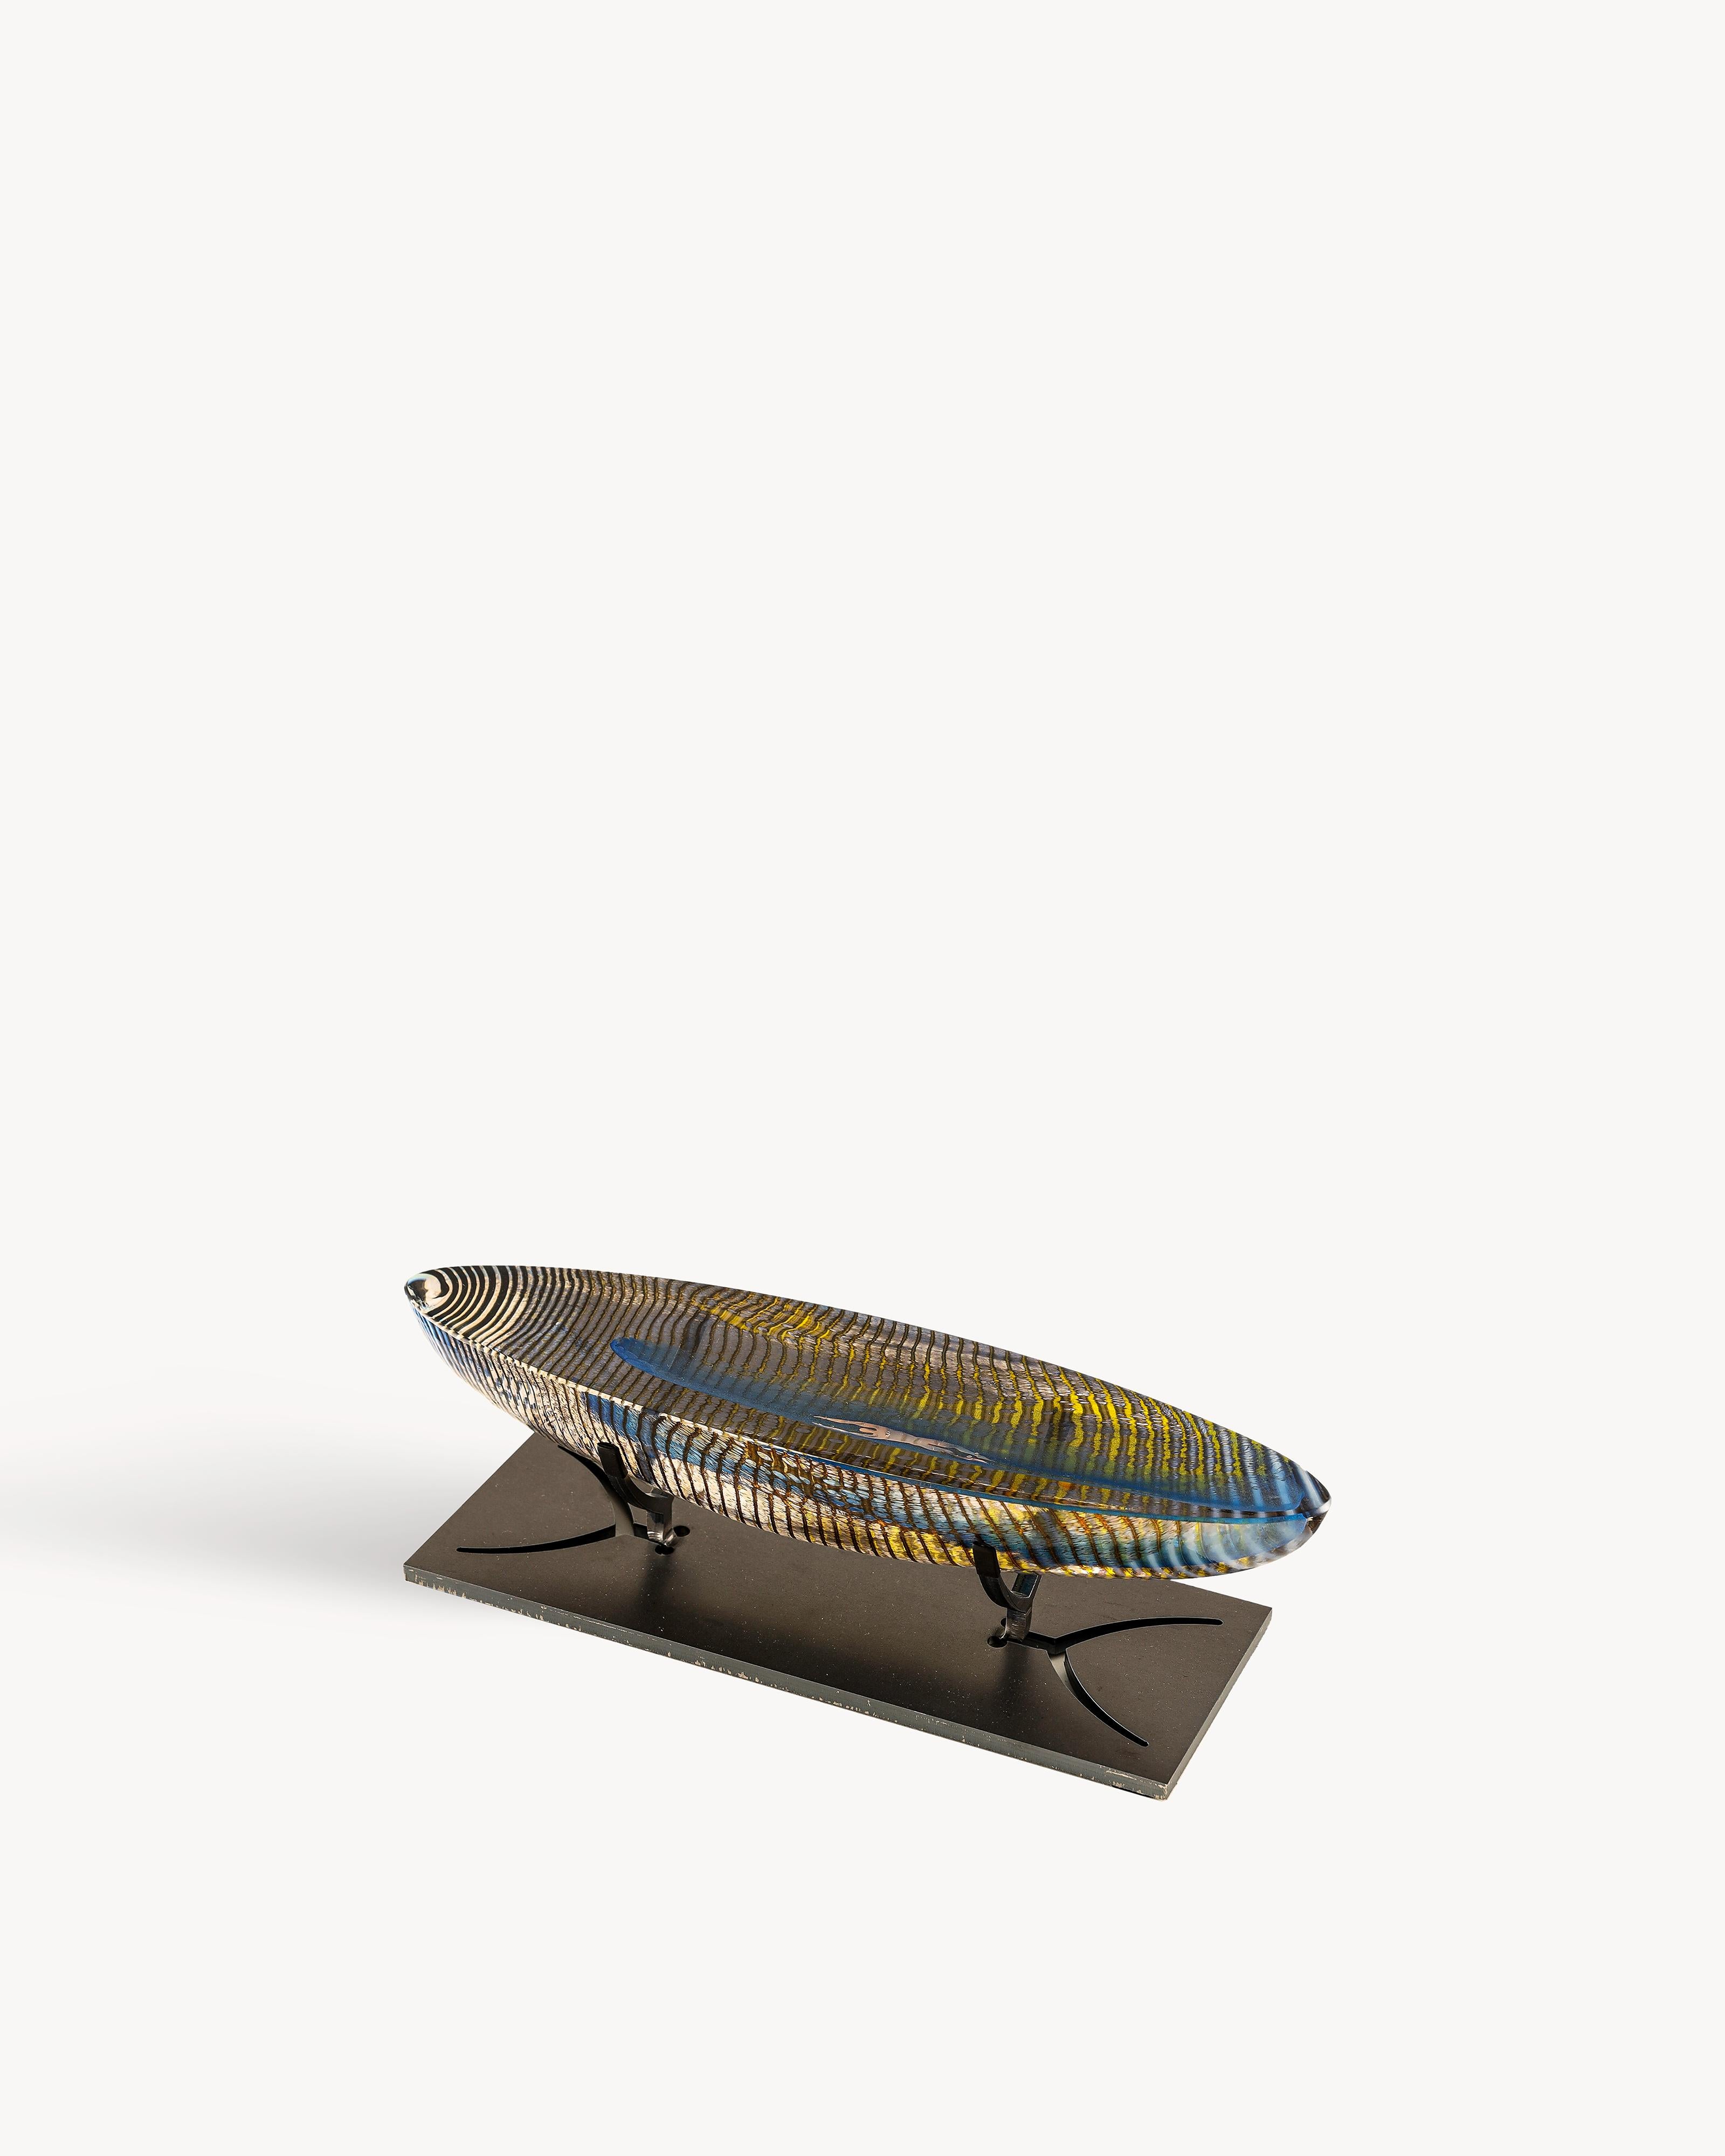 Caspar is a creation by the renowned Swedish glass artist Bertil Vallien who sees the boat as a symbol of freedom and solitude. The boat has become one of his main signatures, recreated in different sizes and forms. Caspar is handmade at Kosta